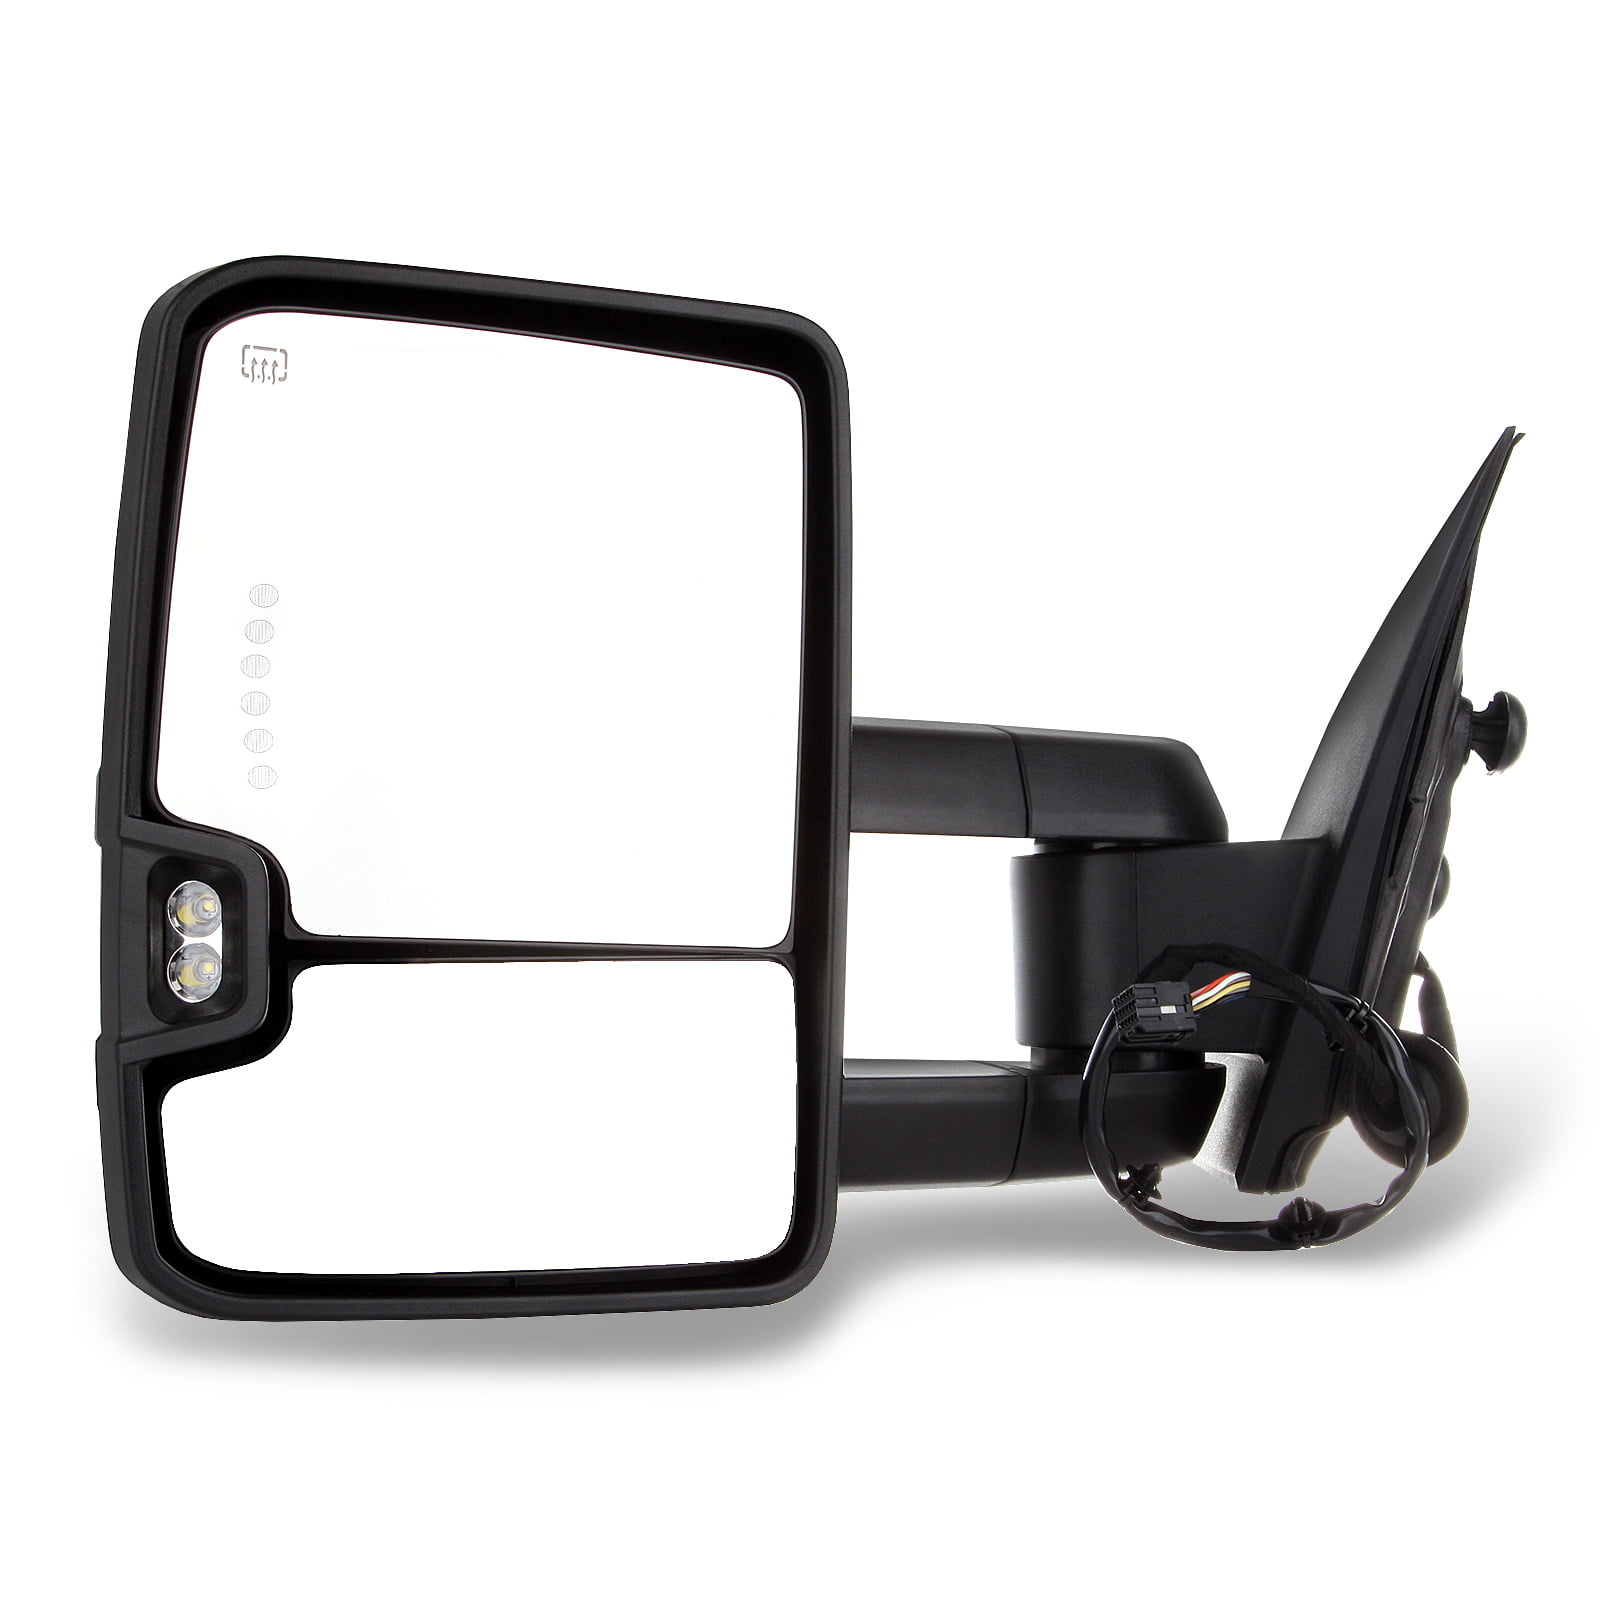 INEEDUP Tow Mirrors Rearview Mirrors Fit for 2014-2017 Chevy Silverado 1500 GMC Sierra 1500 Chevy Silverado/GMC Sierra 2500 HD 3500 with Left Right Side Power Operation Heated with Turn Signal Light 